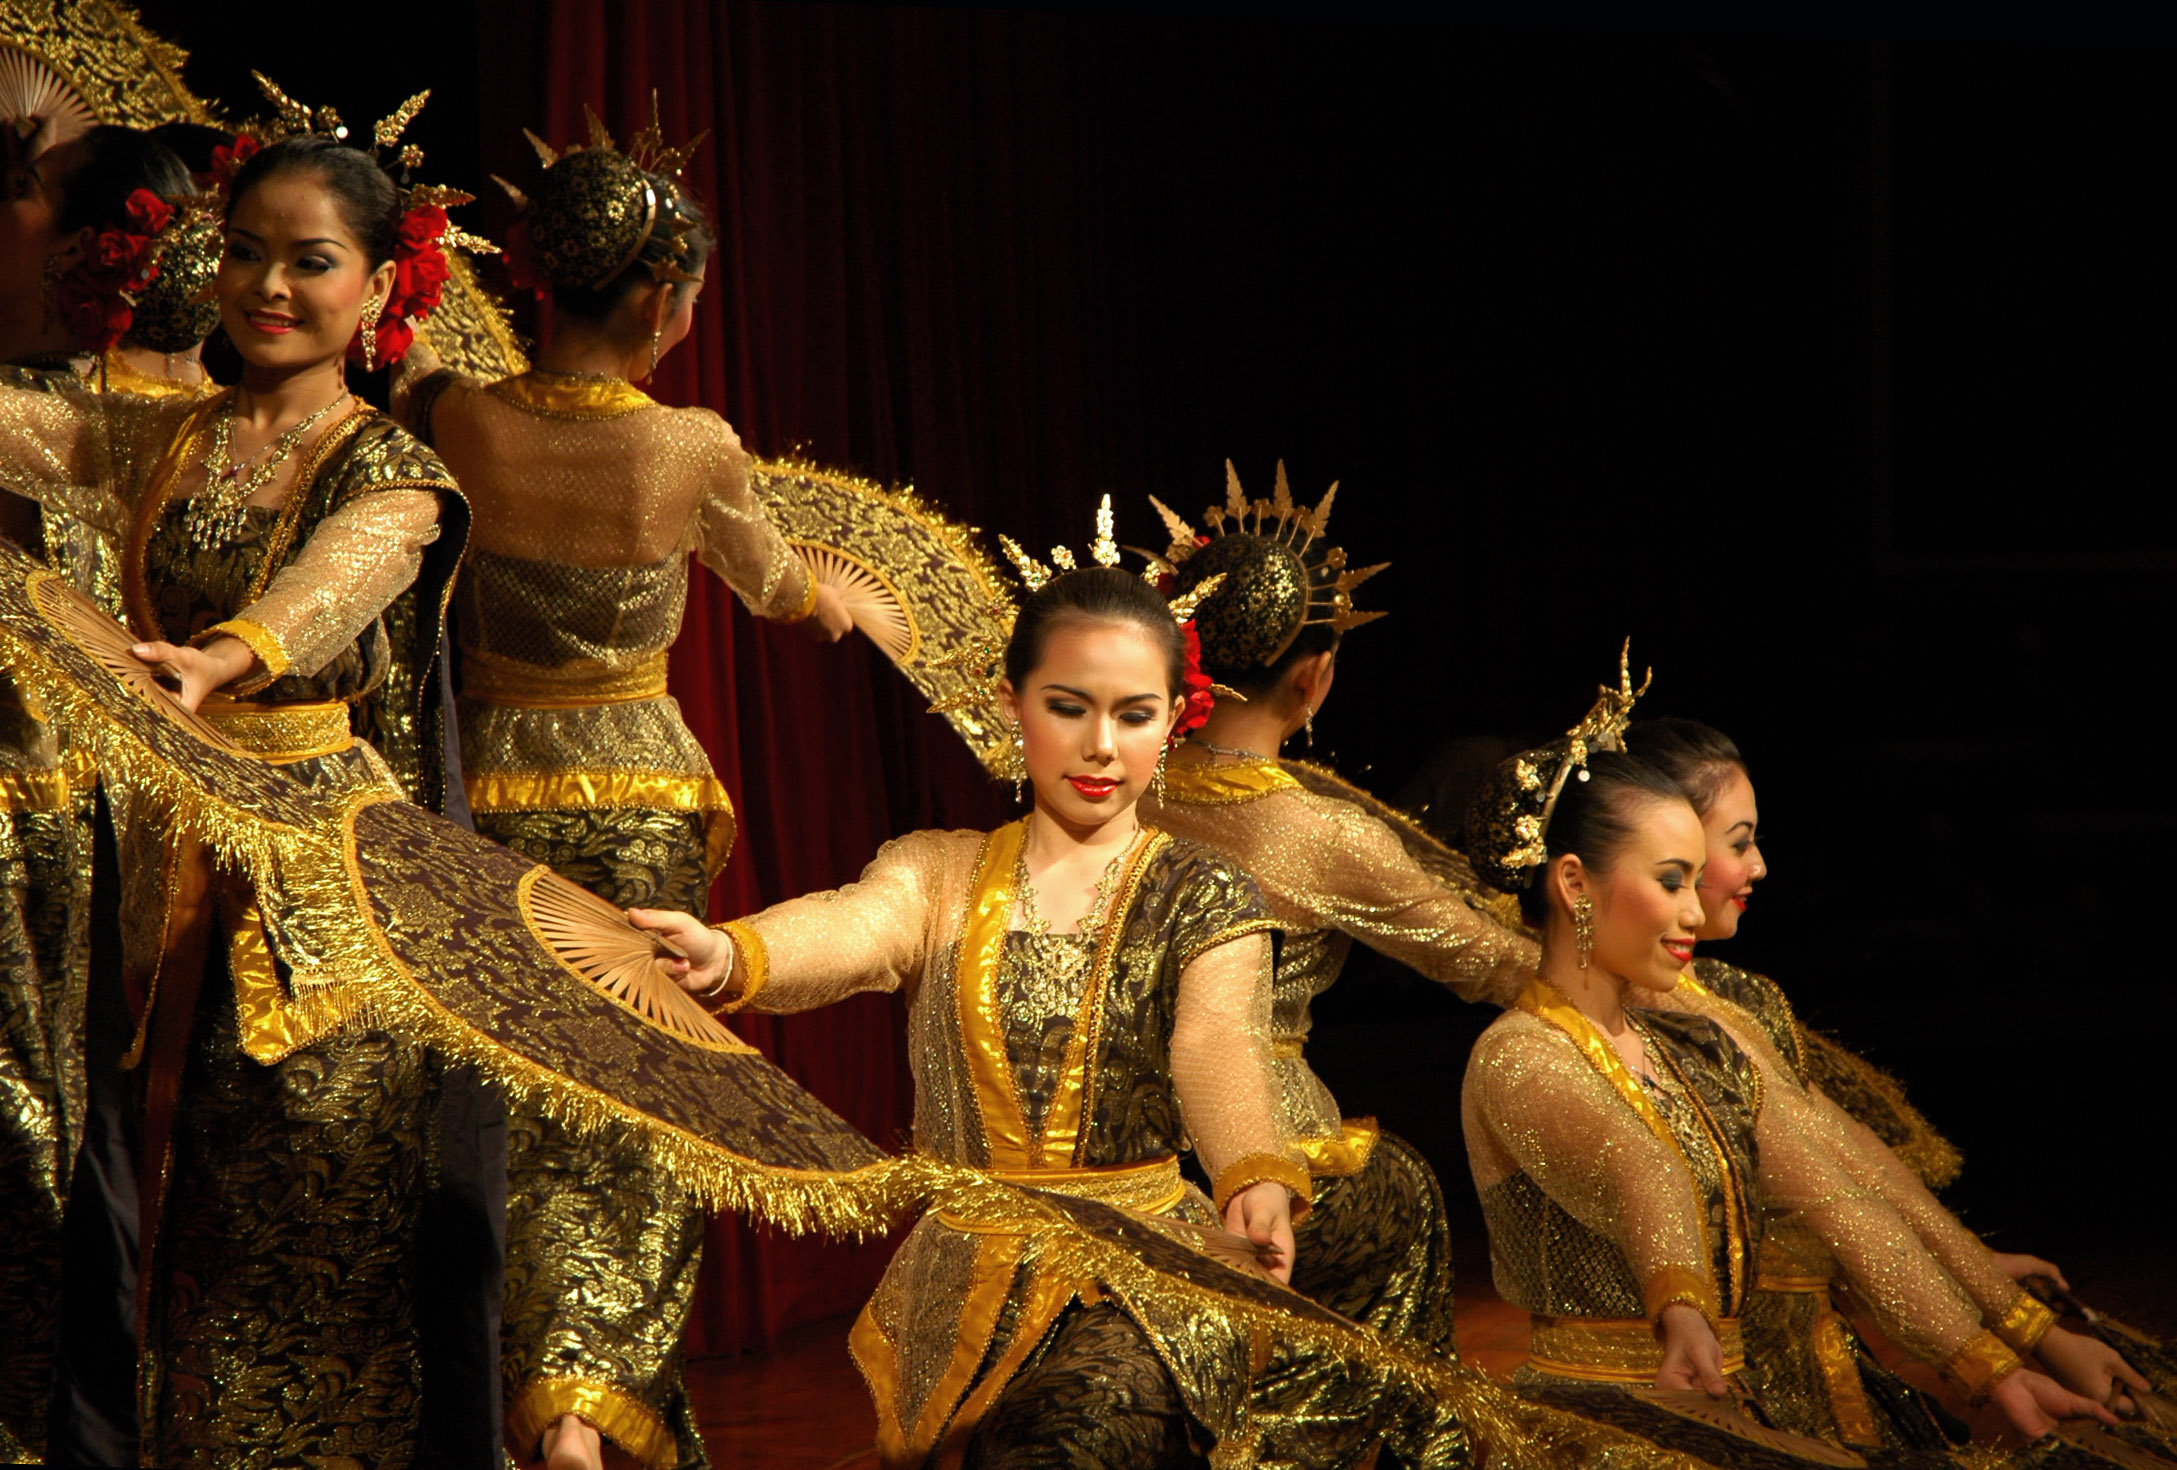 Traditional Thai Dance Troupe 2 | Flickr - Photo Sharing!
 Traditional Thai Dancing